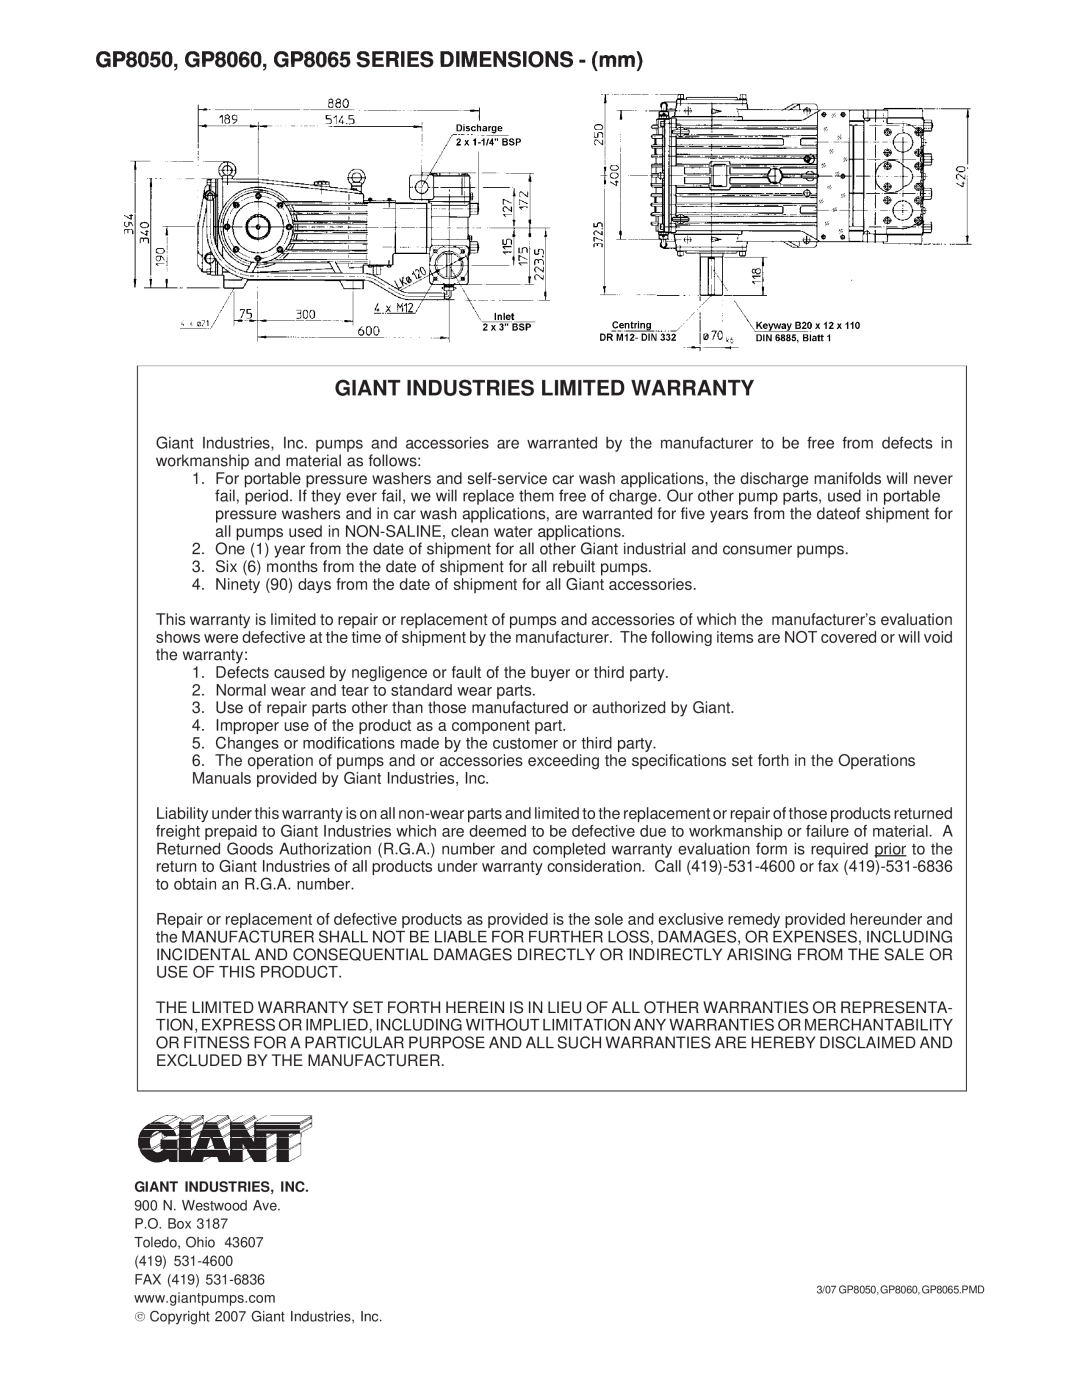 Giant GP8055 installation instructions GP8050, GP8060, GP8065 SERIES DIMENSIONS - mm, Giant Industries Limited Warranty 